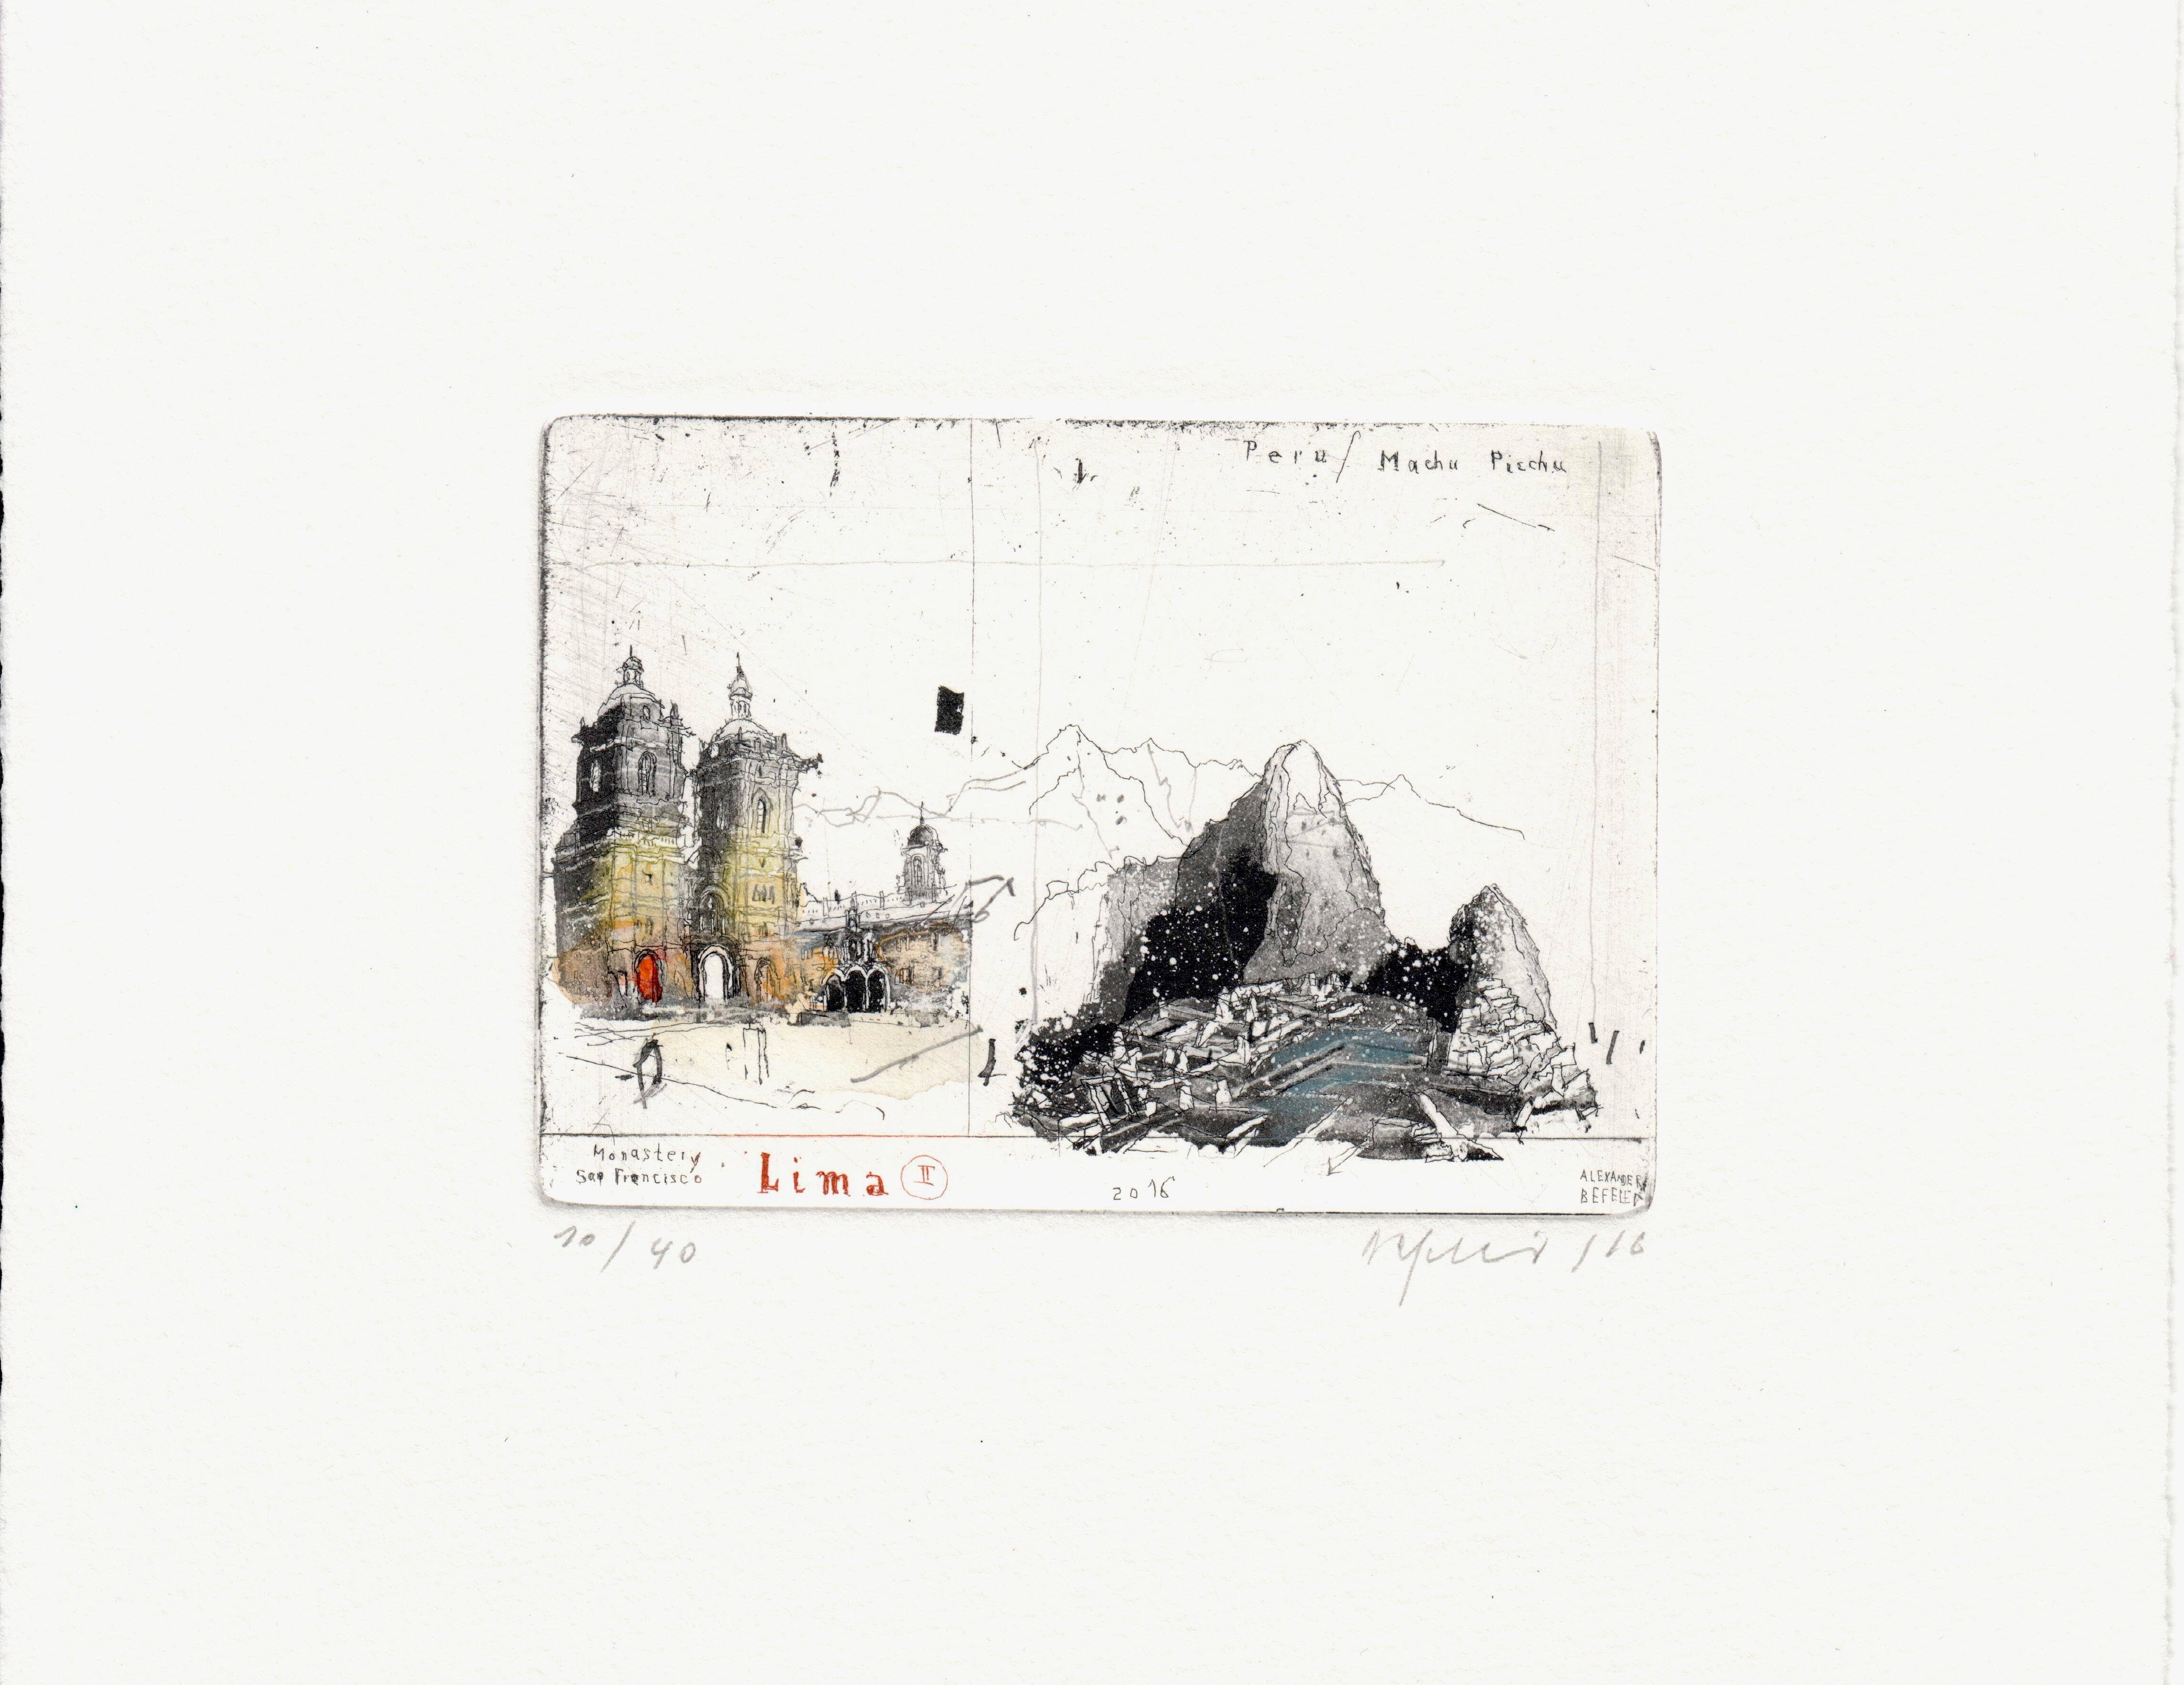 'Peru, Lima II' by Alexander Befelein- beautiful contemporary limited edition print of the city architecture in Lima, Peru. A graphic miniature etching has many layers of details - it's the best choice for small interiors. The print looks like a